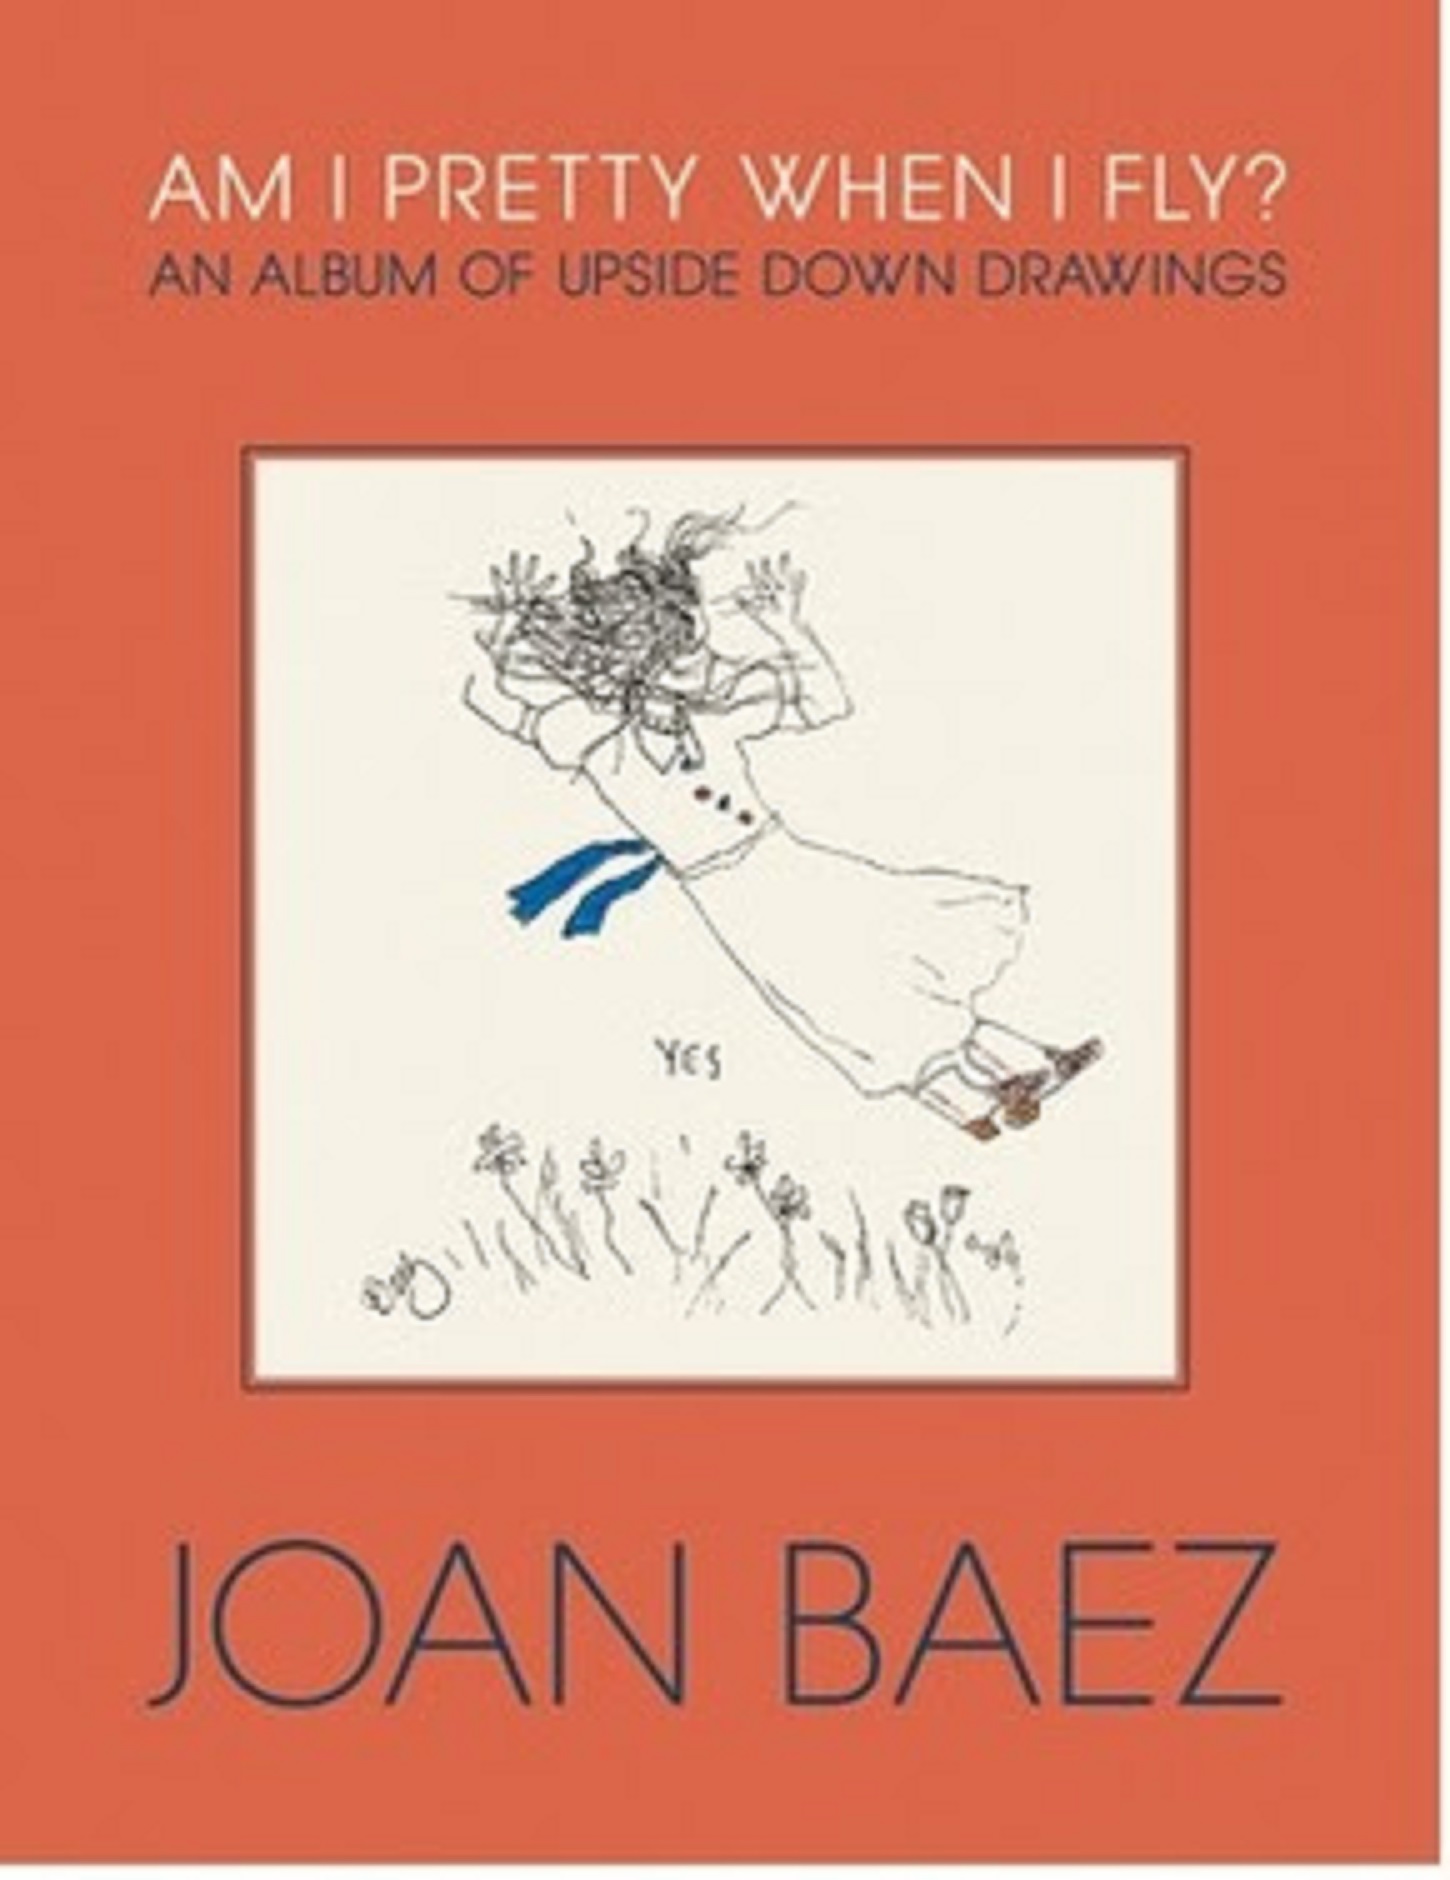 Joan Baez’s "AM I PRETTY WHEN I FLY? An Album of Upside Down Drawings" to be published by Godine on April 4